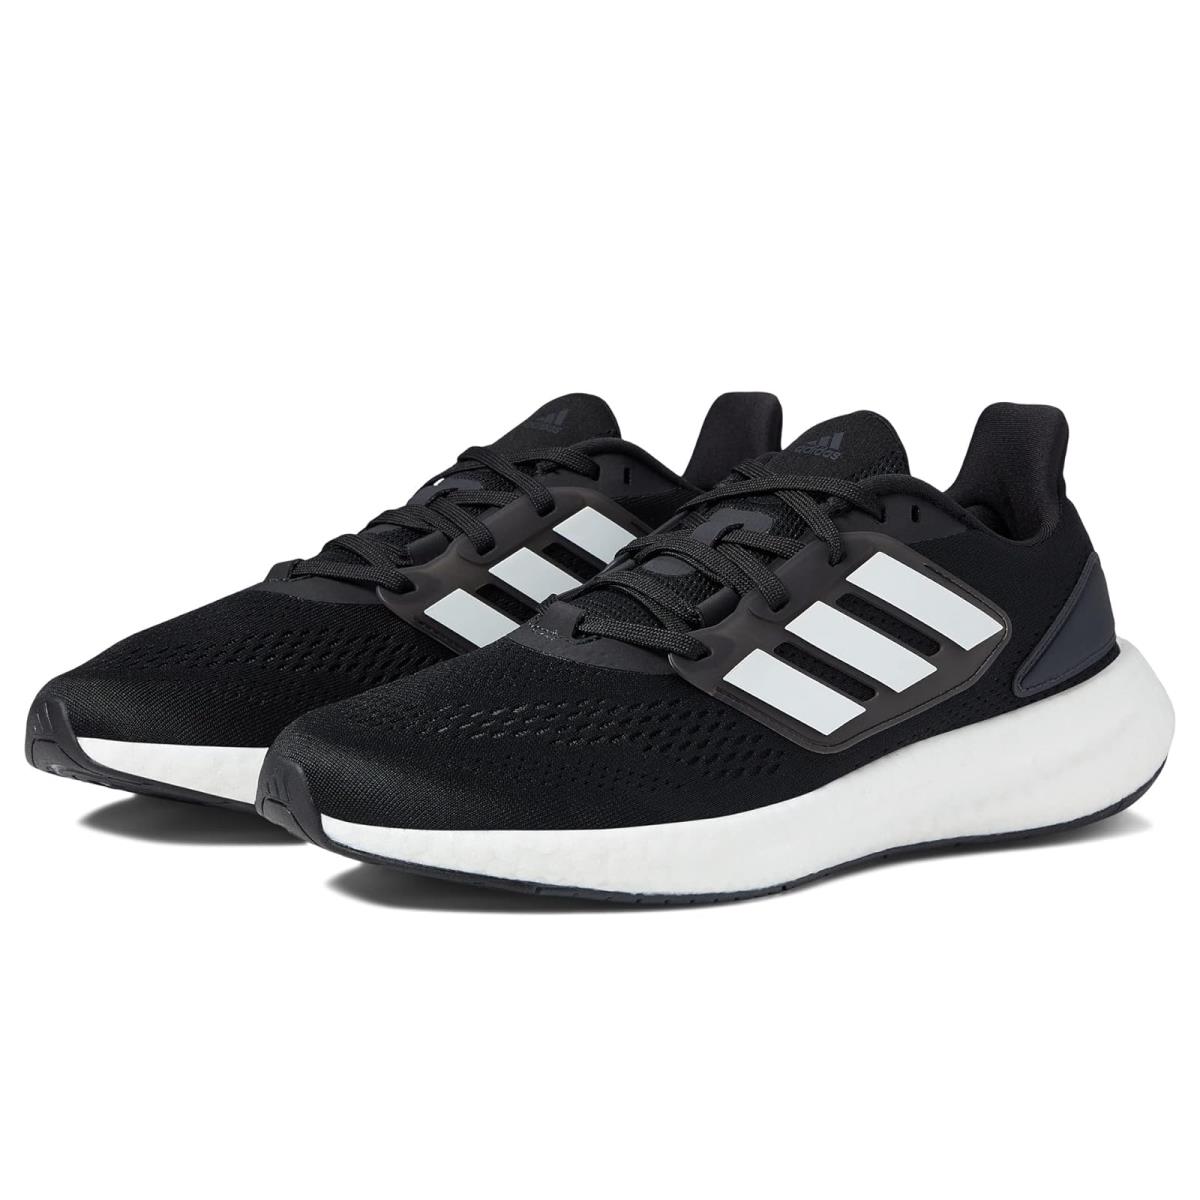 Man`s Sneakers Athletic Shoes Adidas Running Pureboost 22 Black/Black/Carbon 1